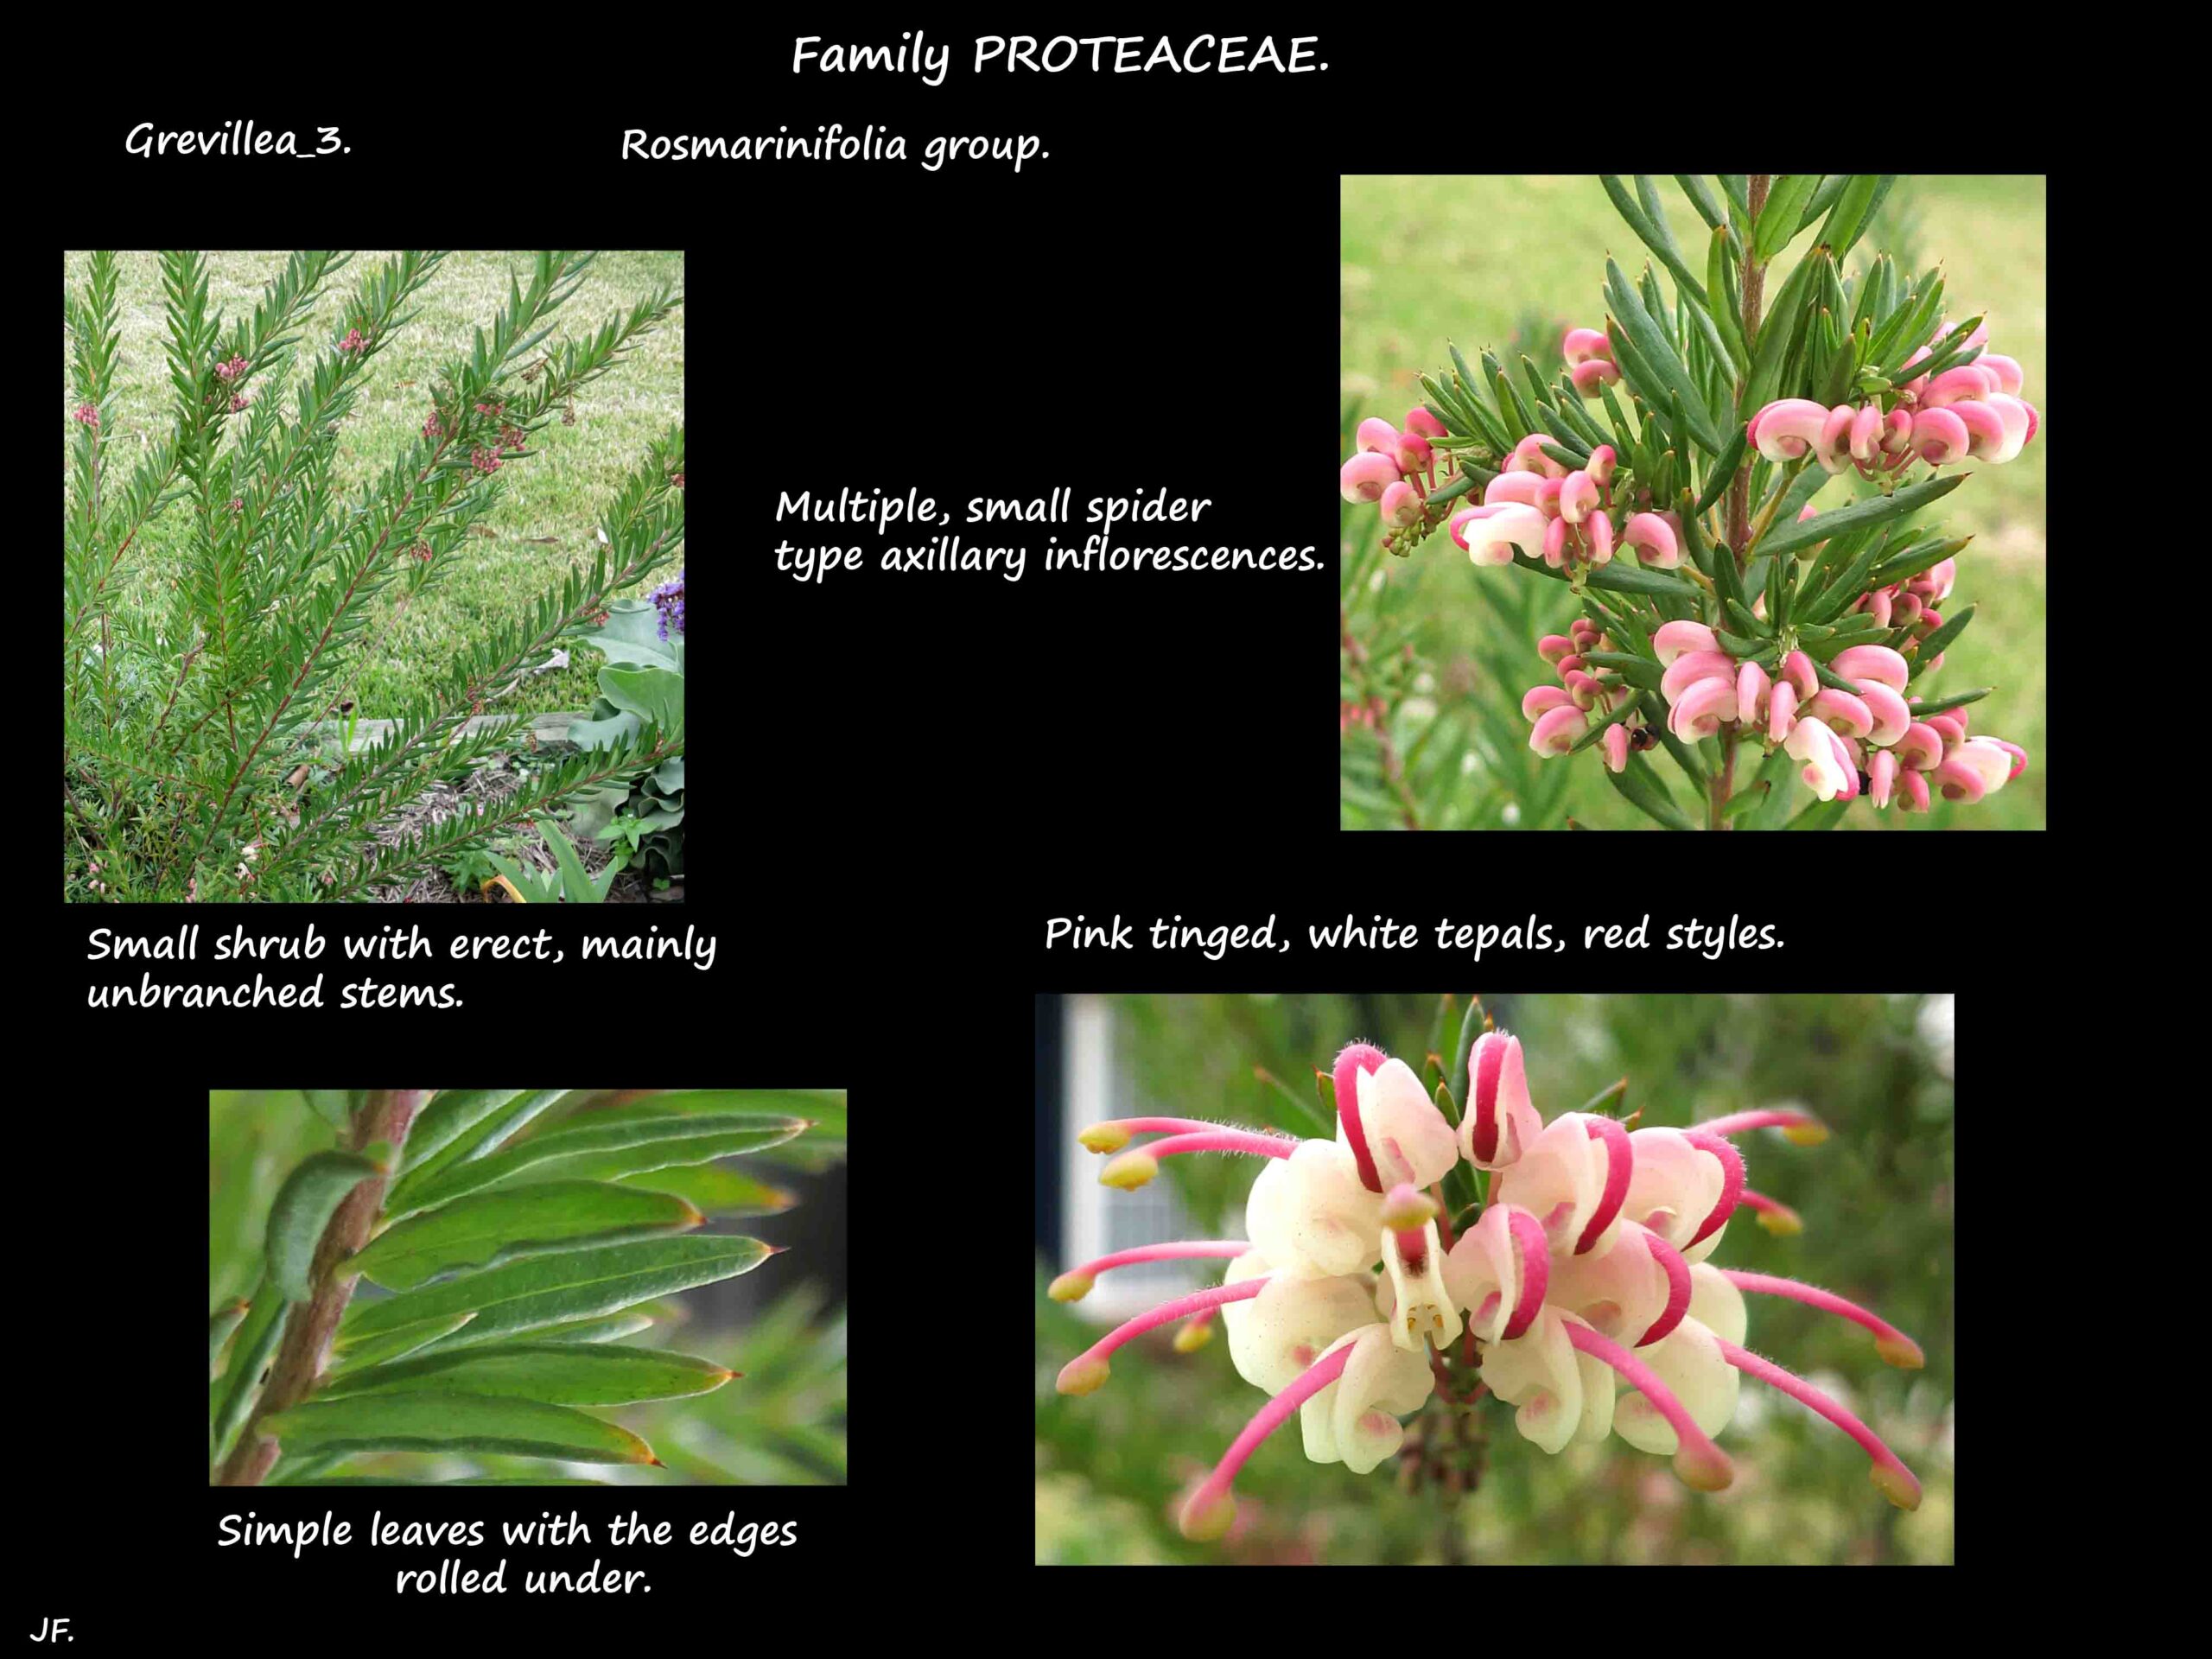 3 Grevillea with white & pink flowers